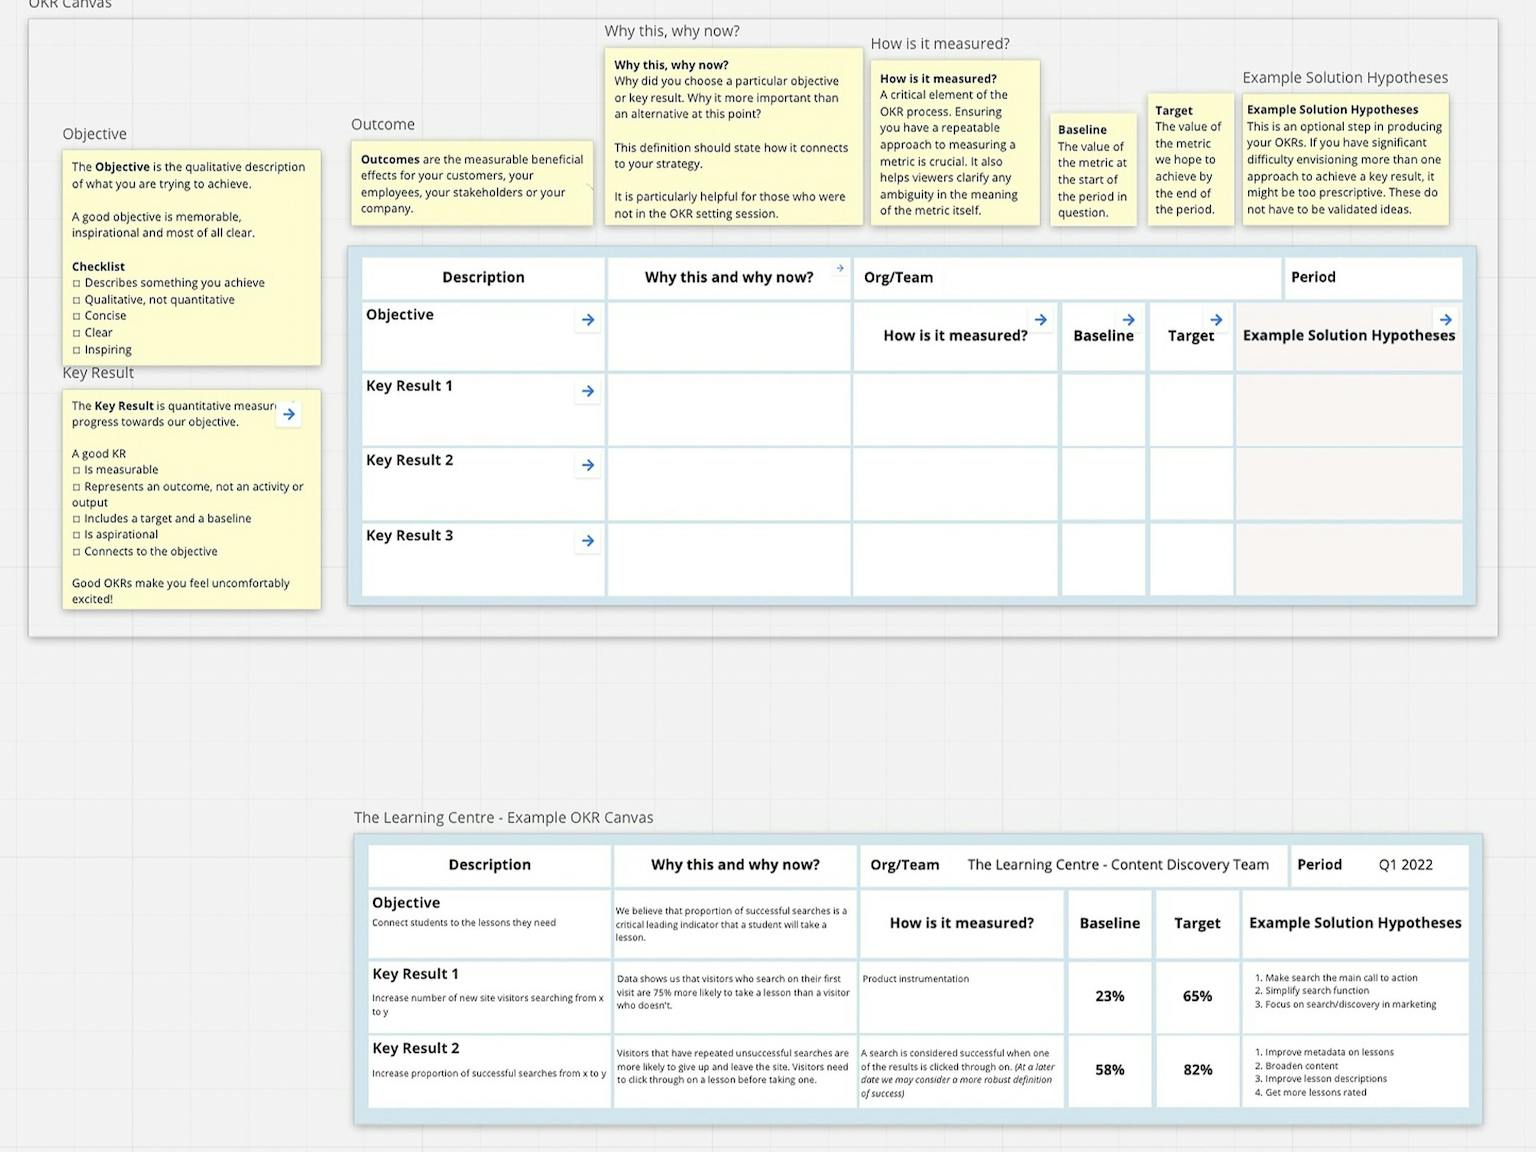 Get to work with a proven canvas and tracking template. Tools that will serve you from Day 1.